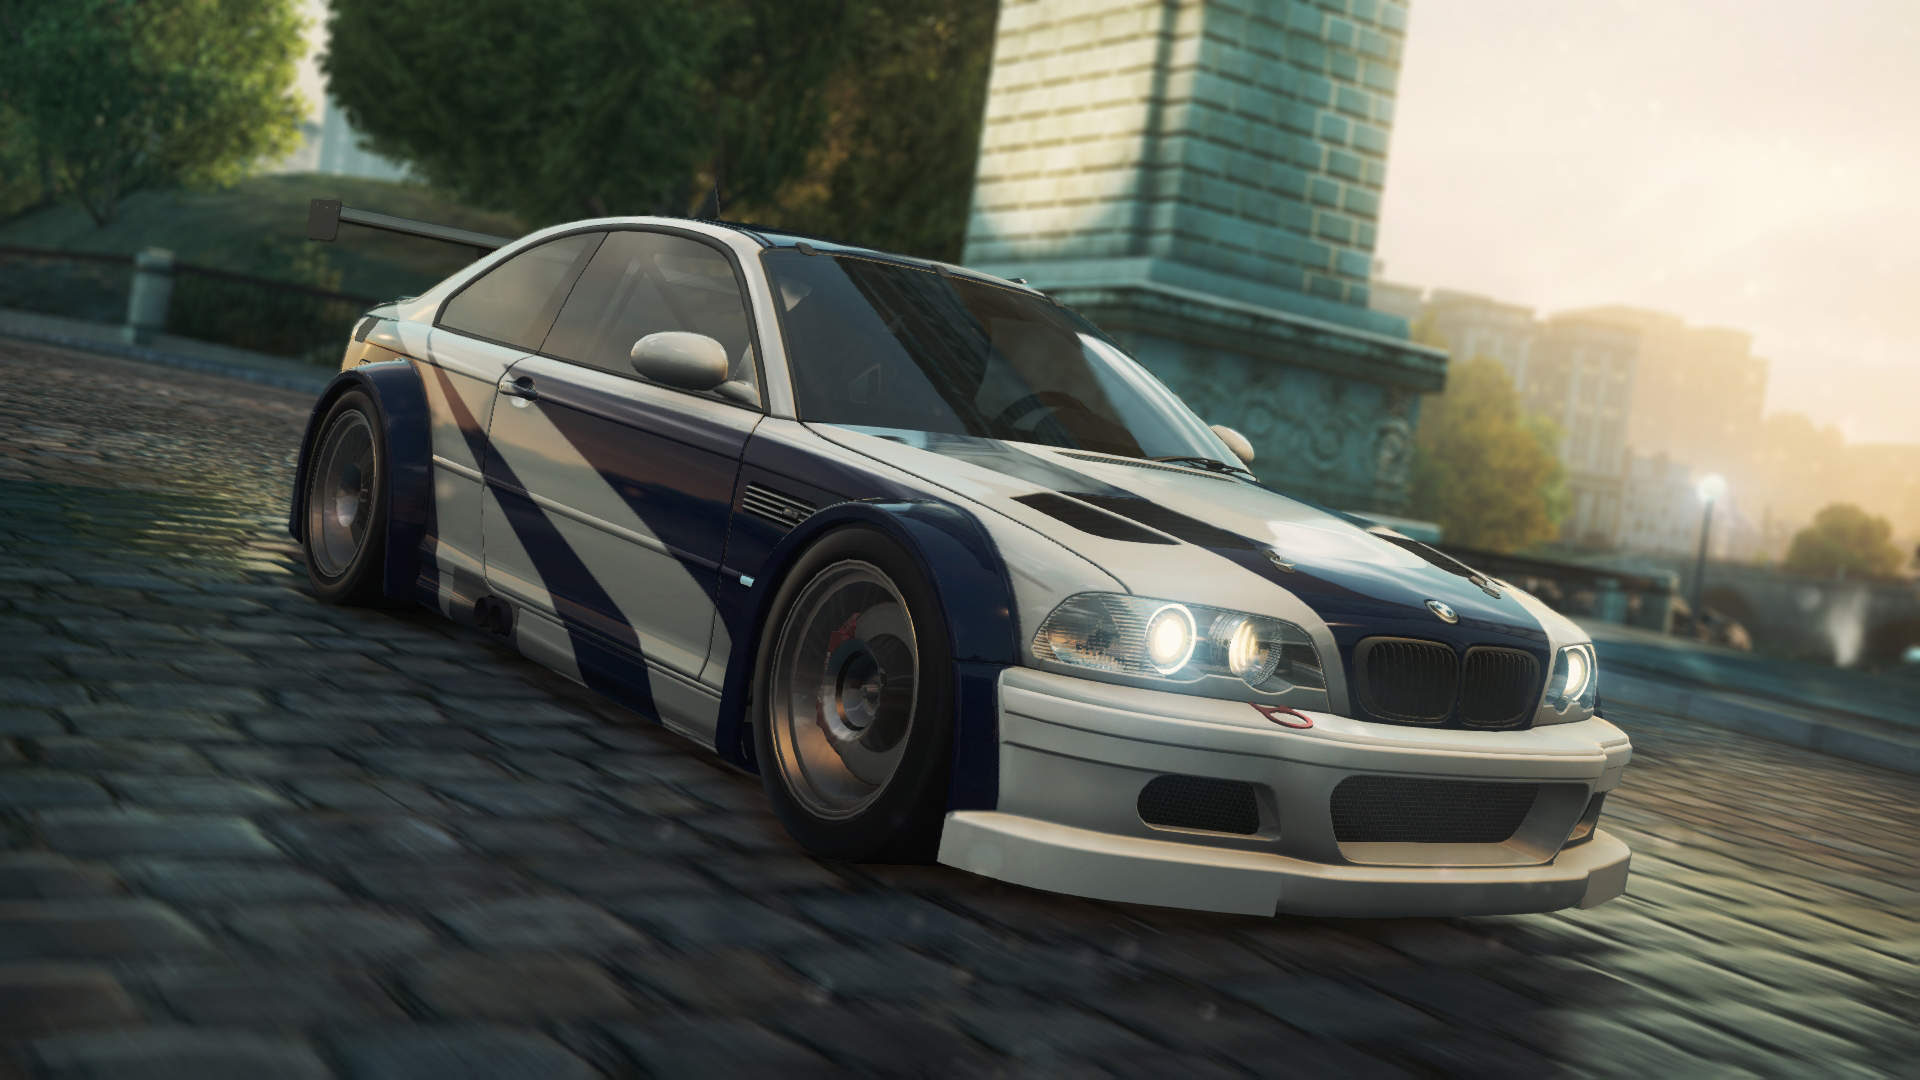 Need for speed carbon bmw m3 gtr in career mode